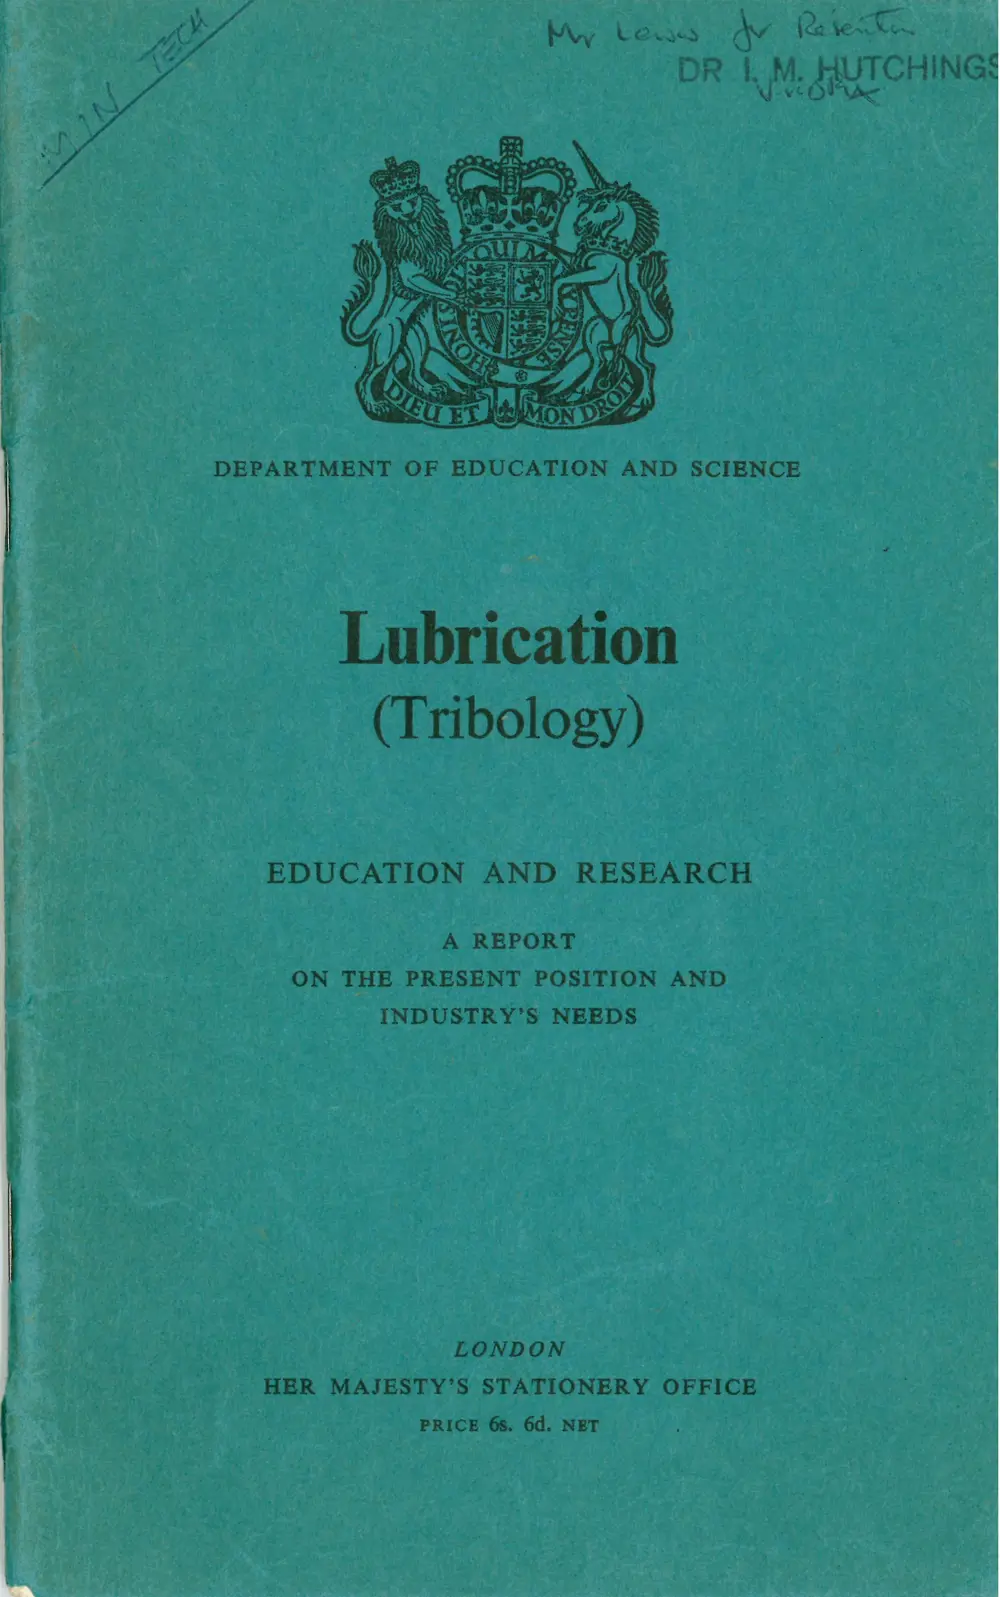 The cover of a report on Lubrication (Tribology).